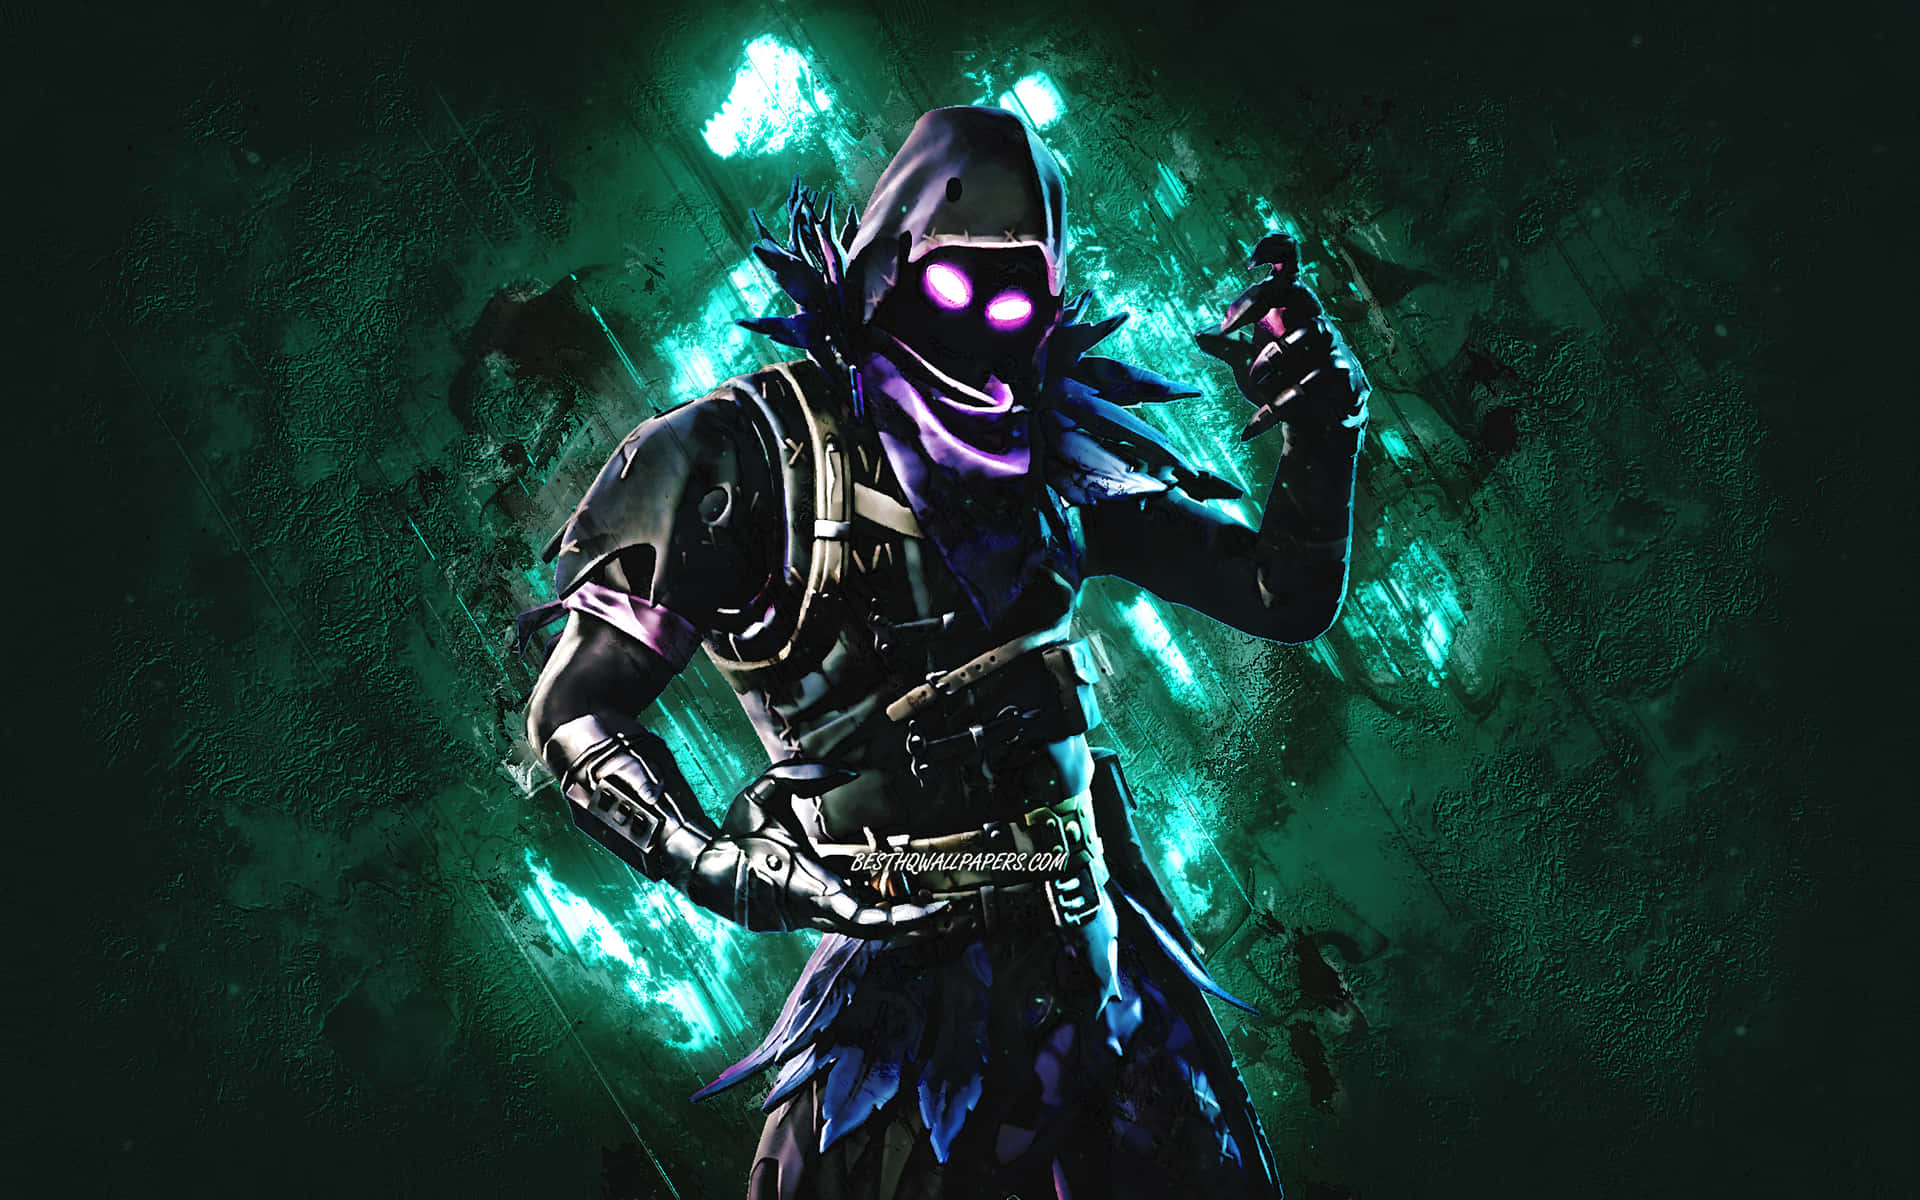 Fly high into Epic Victory with the Raven Outfit! Wallpaper